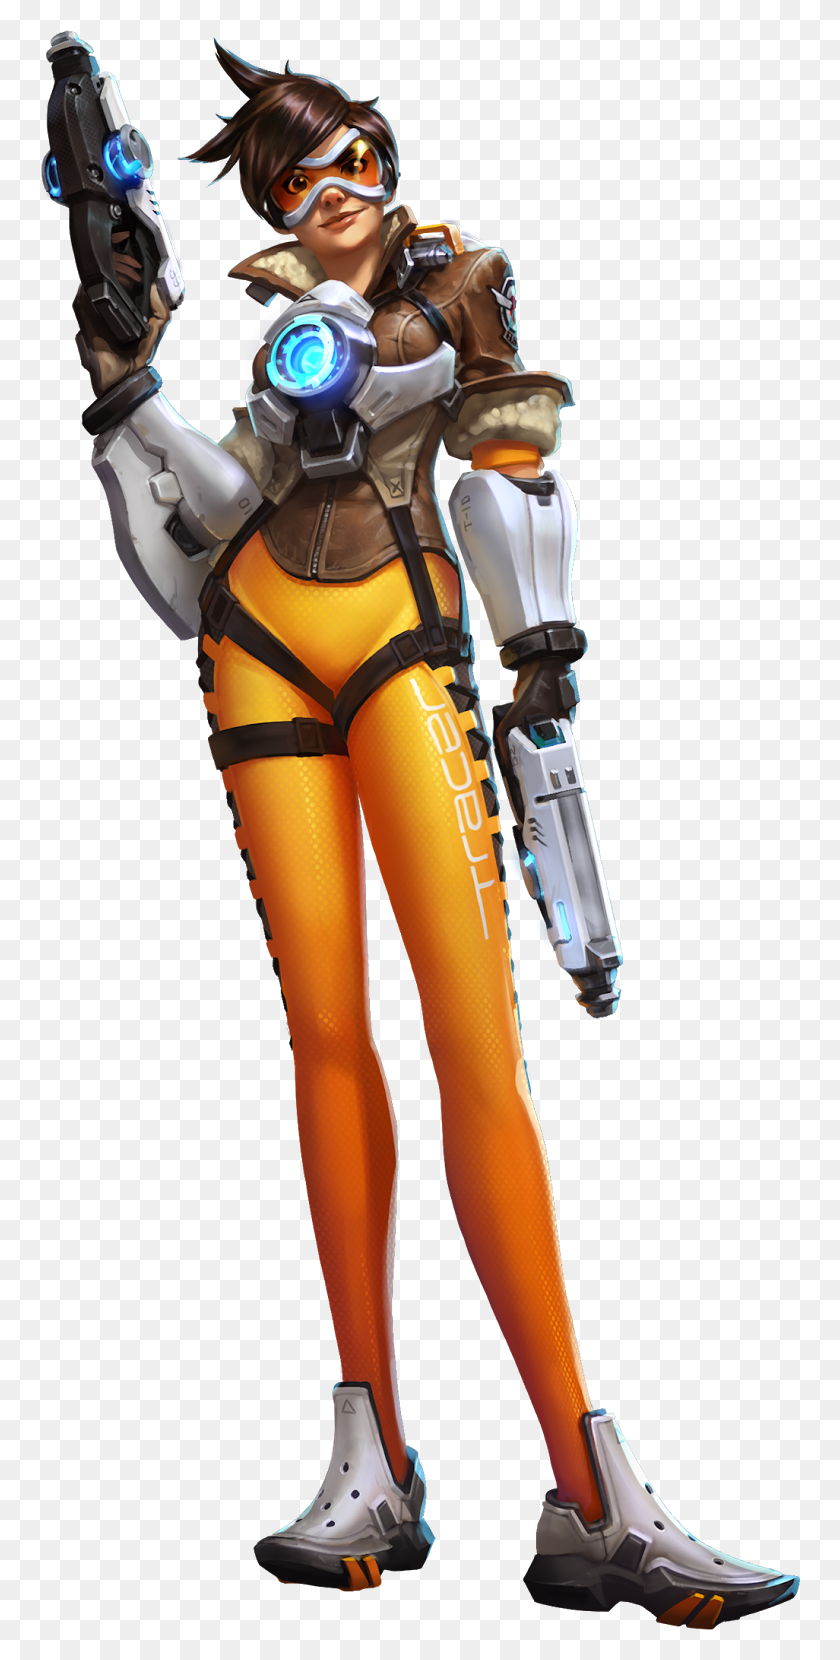 760x1600 Tracer Overwatch Heroes Of The Storm Tracer, Одежда, Одежда, Солнцезащитные Очки Hd Png Скачать